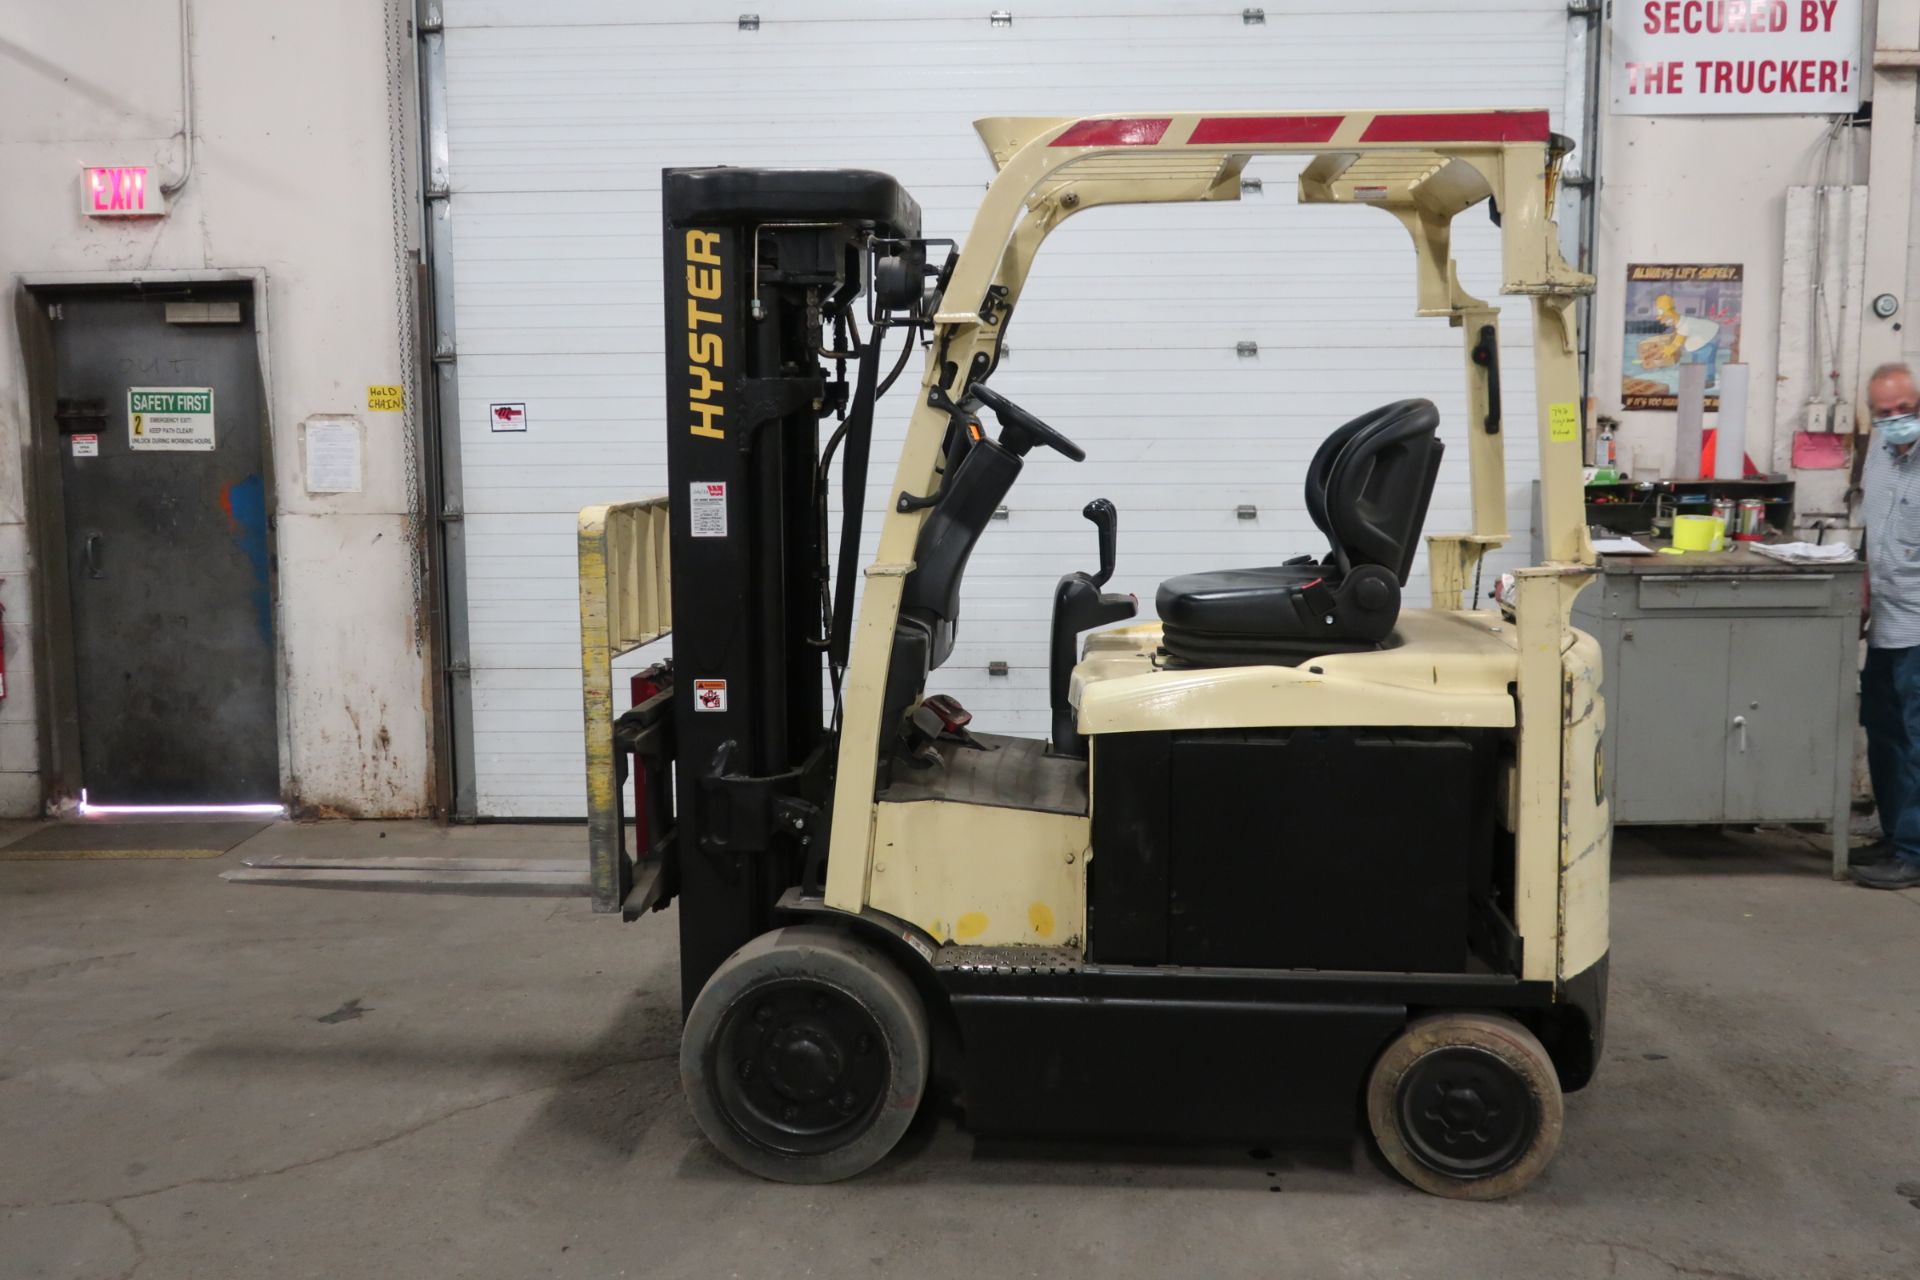 FREE CUSTOMS - 2014 Hyster 5000lbs Capacity Forklift with 4-stage mast - electric with charger